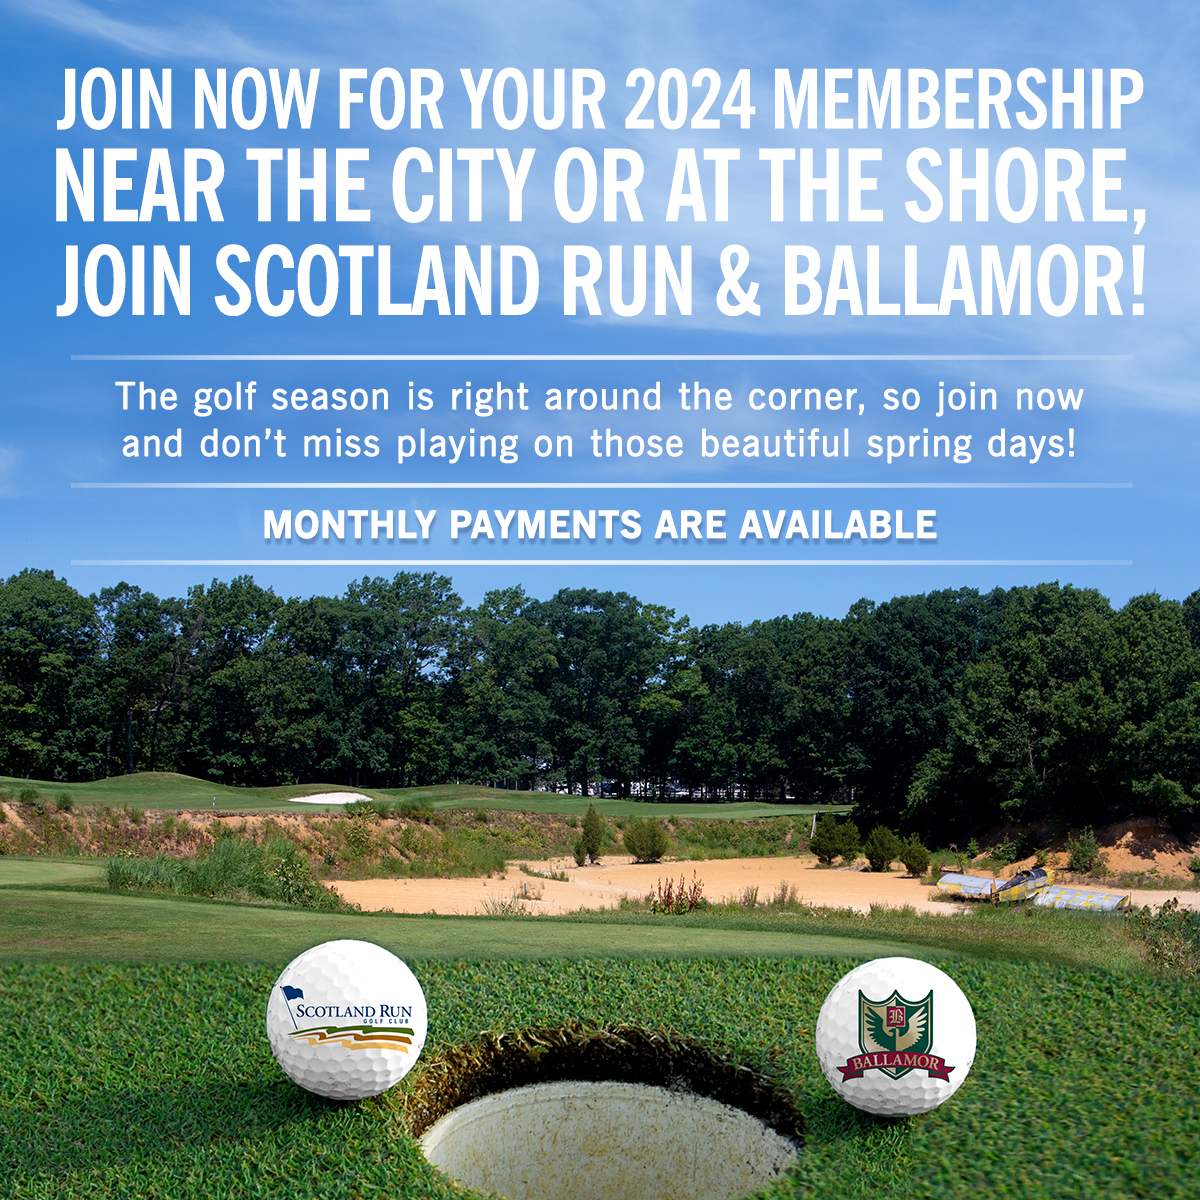 Today is the first day of spring, and that means it's time to get back on the golf course! Join now for your 2024 Dual Membership at Scotland Run and Ballamor. Monthly payments are now available! Learn More and Become a Member: brnw.ch/21wI1sn